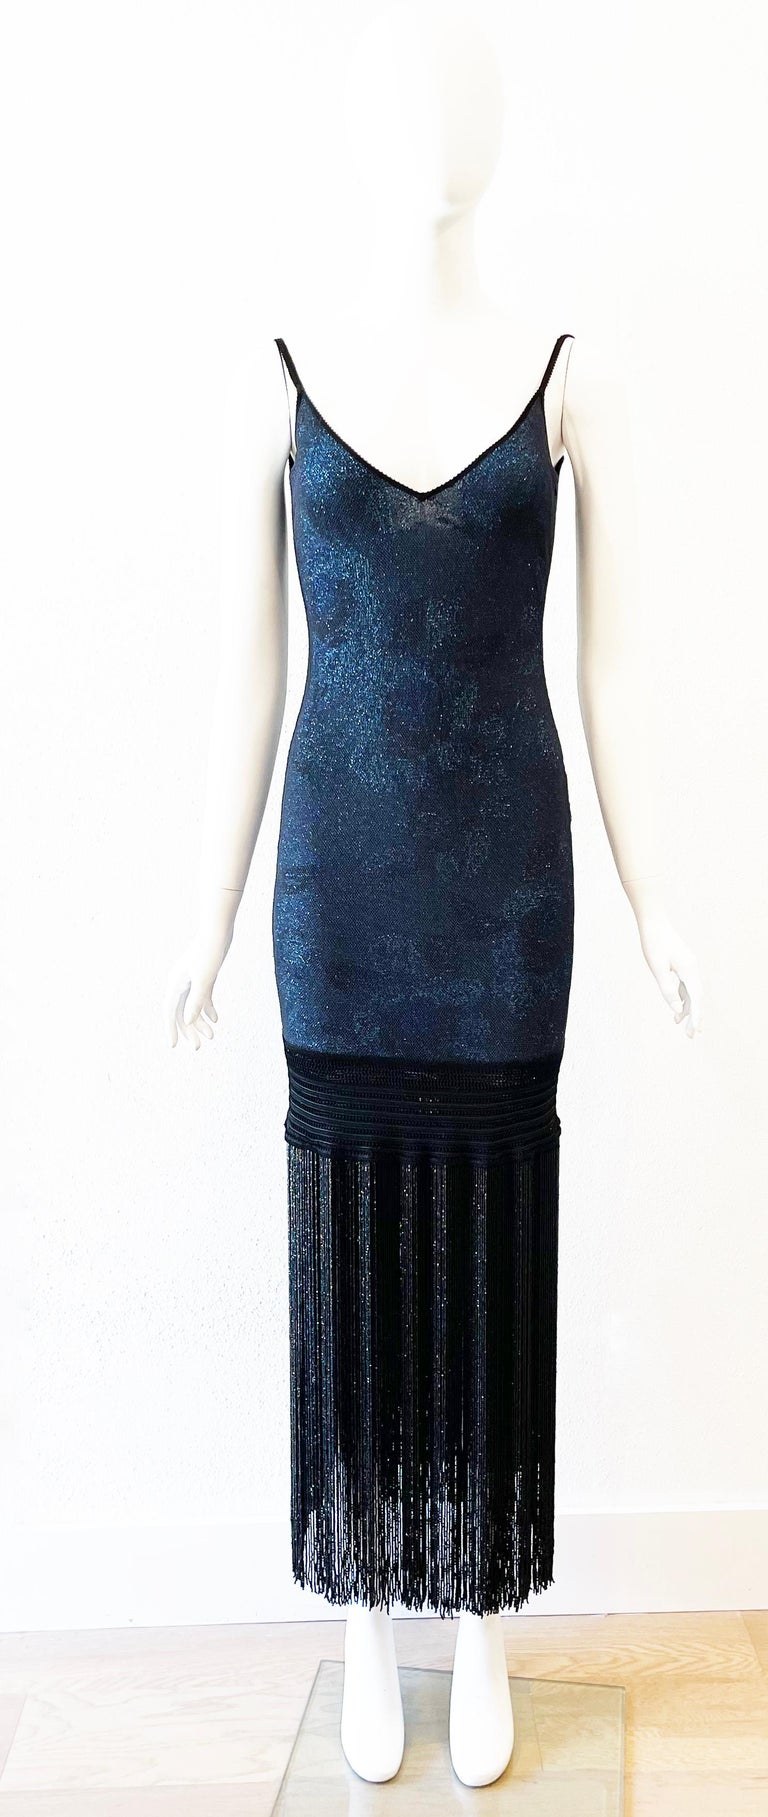 1998 SS Galliano blue metallic stretch slip dress with lace overlay and beaded fringe hem. Size S
Condition: Very good
18.5